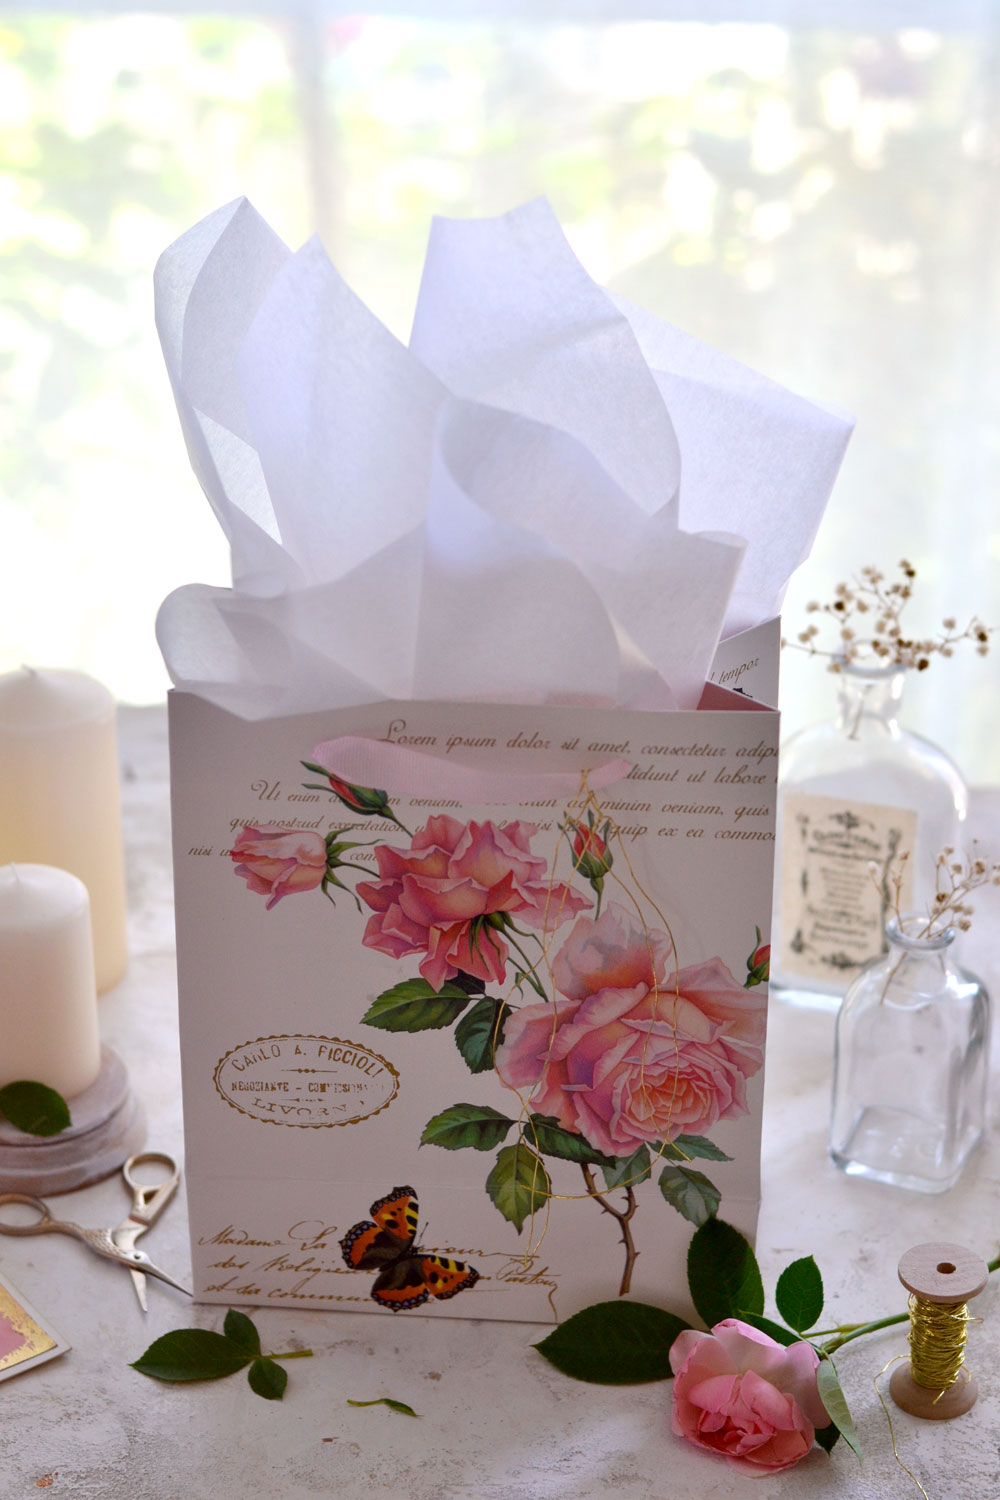 white tissue with pink rose bag